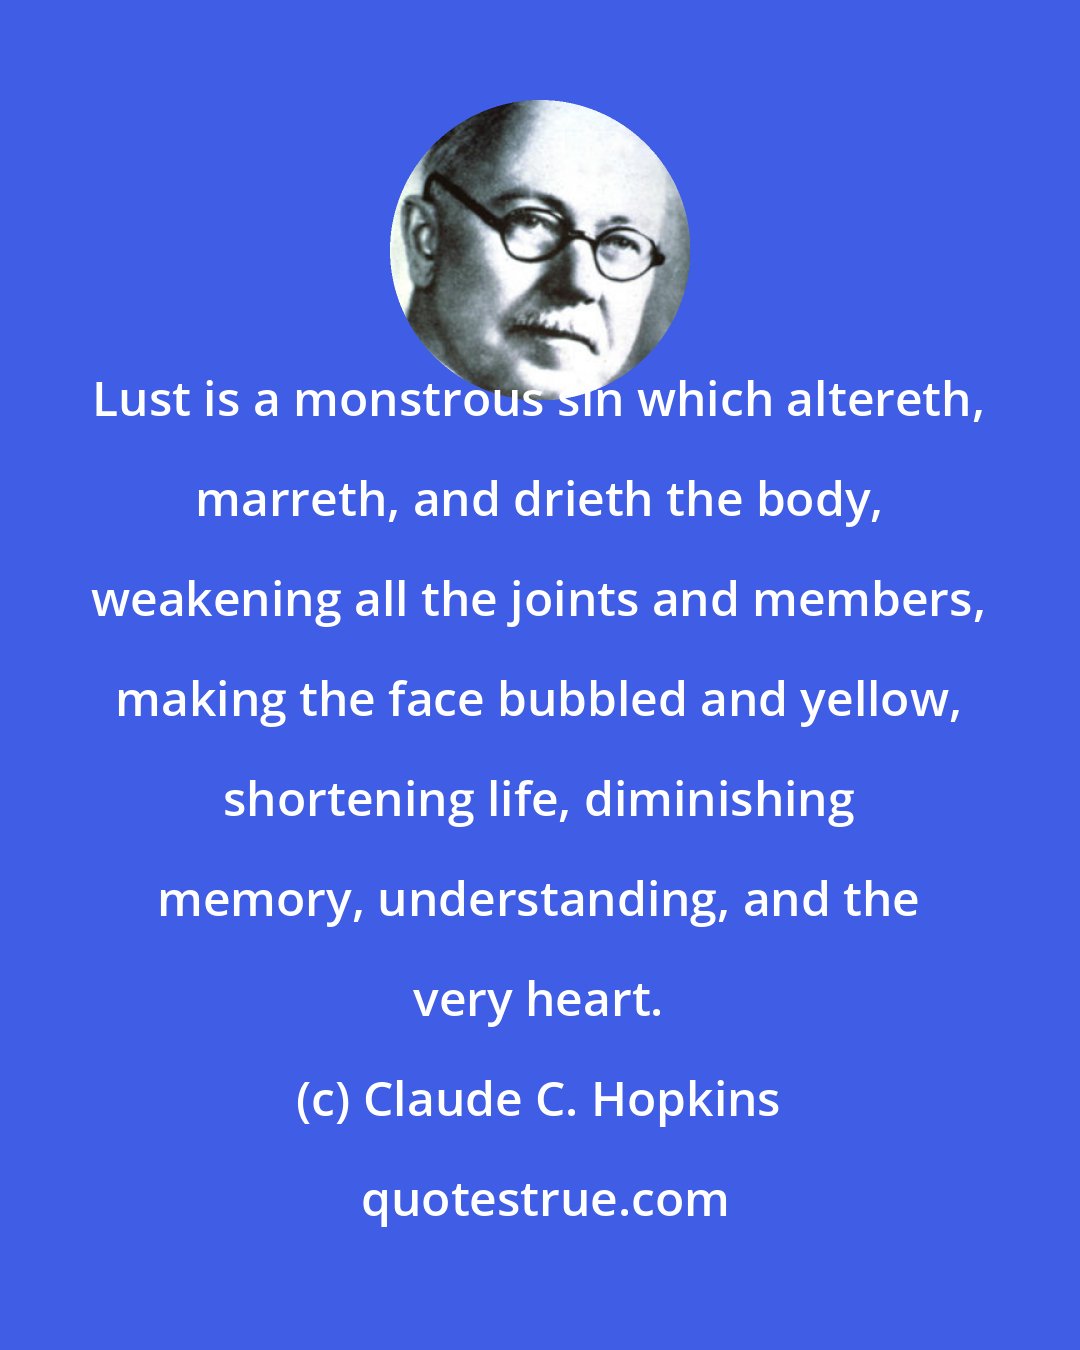 Claude C. Hopkins: Lust is a monstrous sin which altereth, marreth, and drieth the body, weakening all the joints and members, making the face bubbled and yellow, shortening life, diminishing memory, understanding, and the very heart.